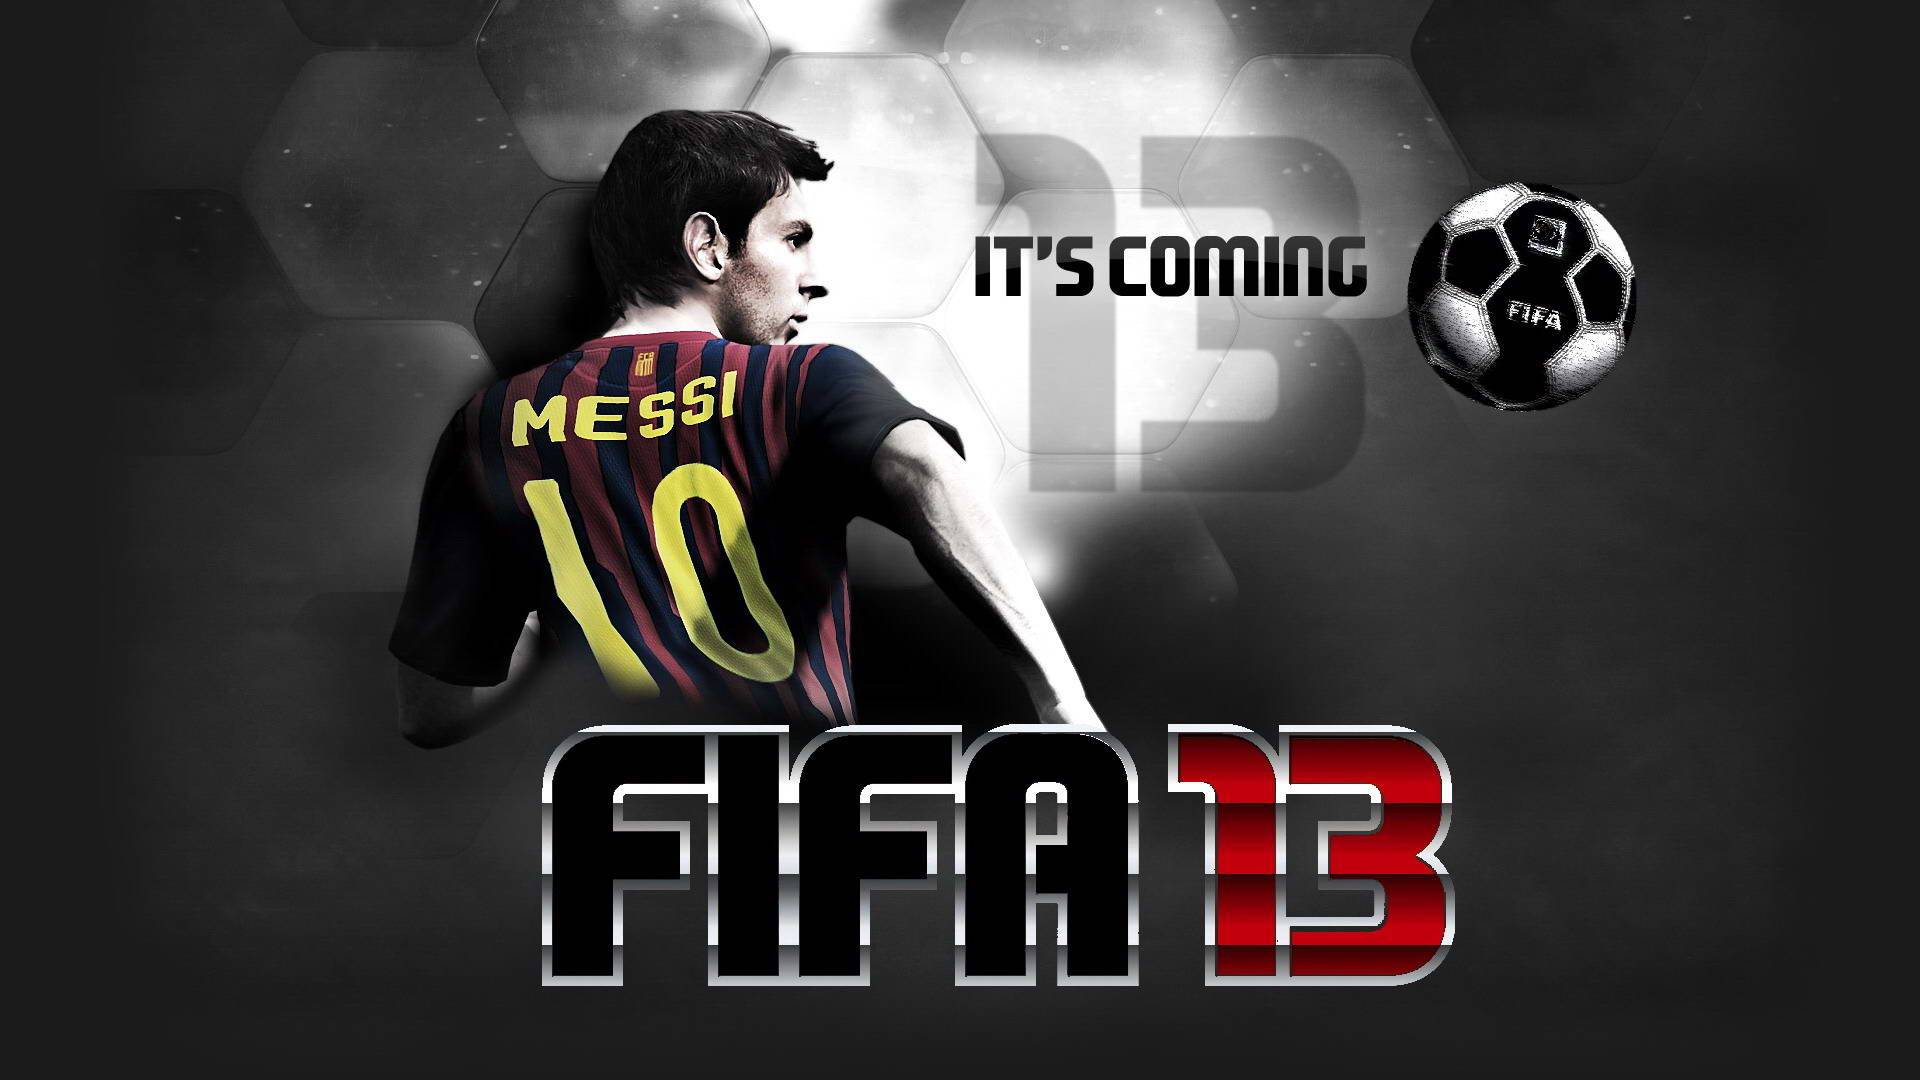 Fifa Wallpaper In HD Gamingbolt Video Game News Res